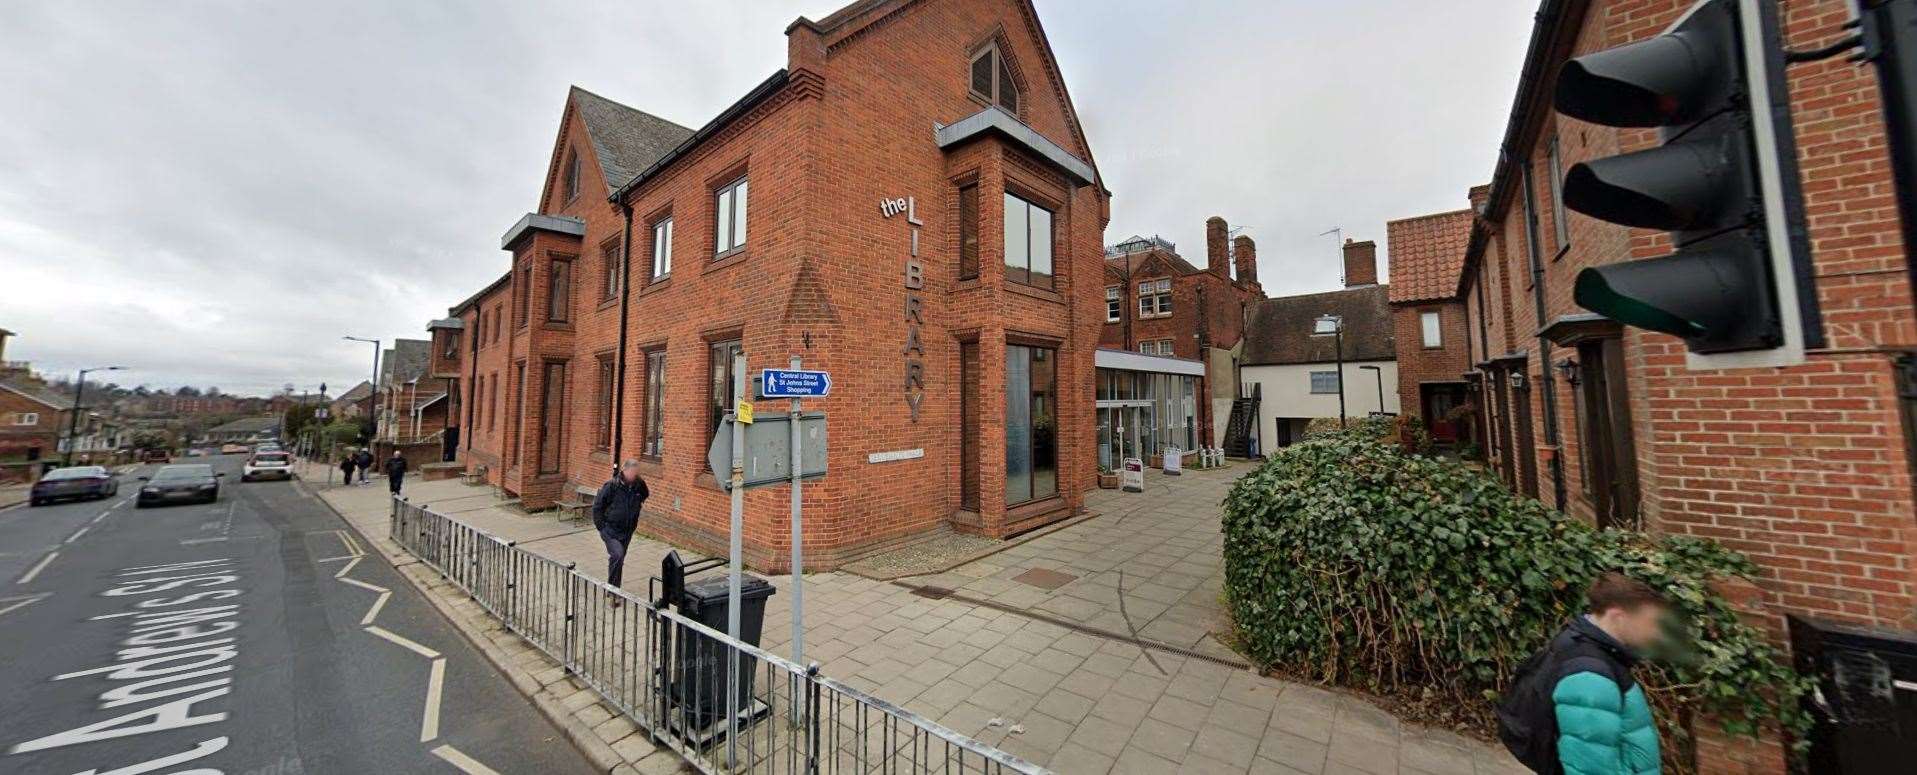 Suffolk Libraries is launching its Explore Together scheme, which aims to support people experiencing loneliness and isolation. Picture: Google Maps